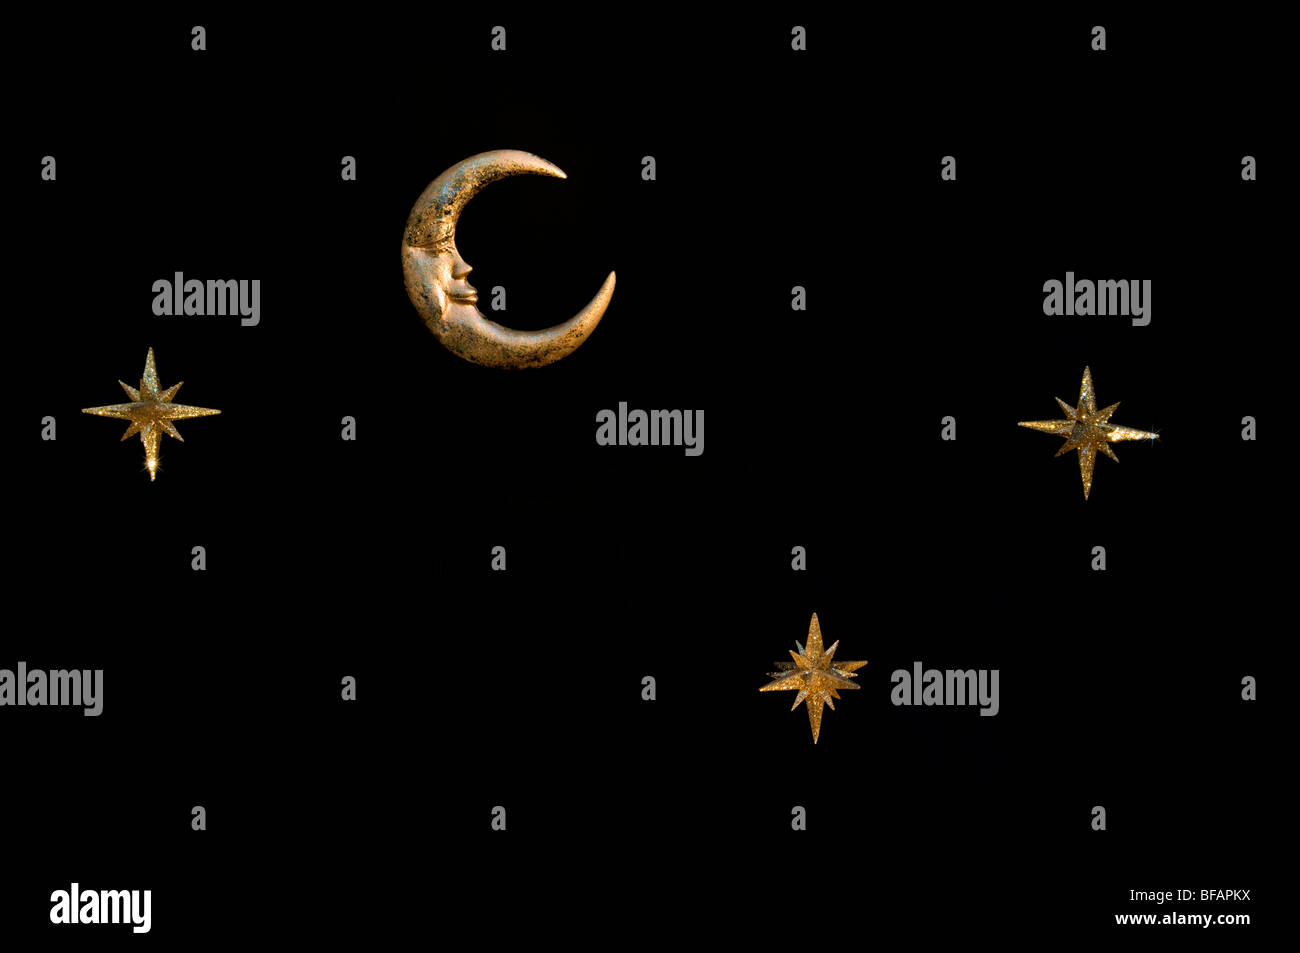 Gold shiny moon and stars sparkly hanging christmas decorations against a black background Stock Photo